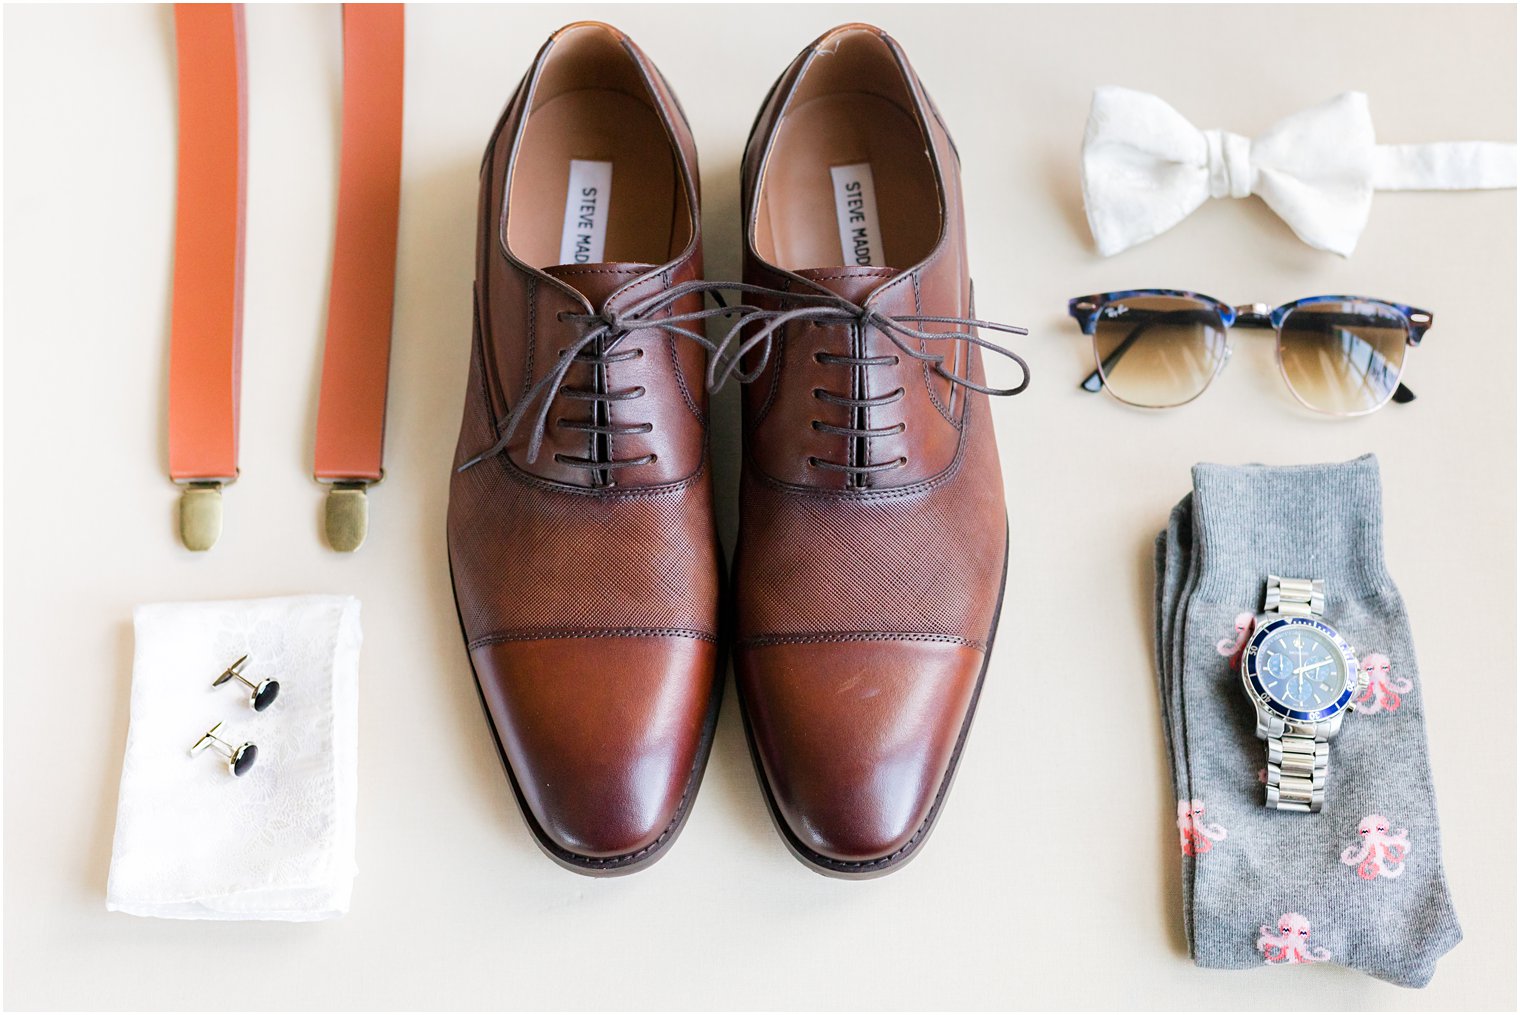 groom's brown shoes, suspenders, white bowtie and details for NJ wedding day 